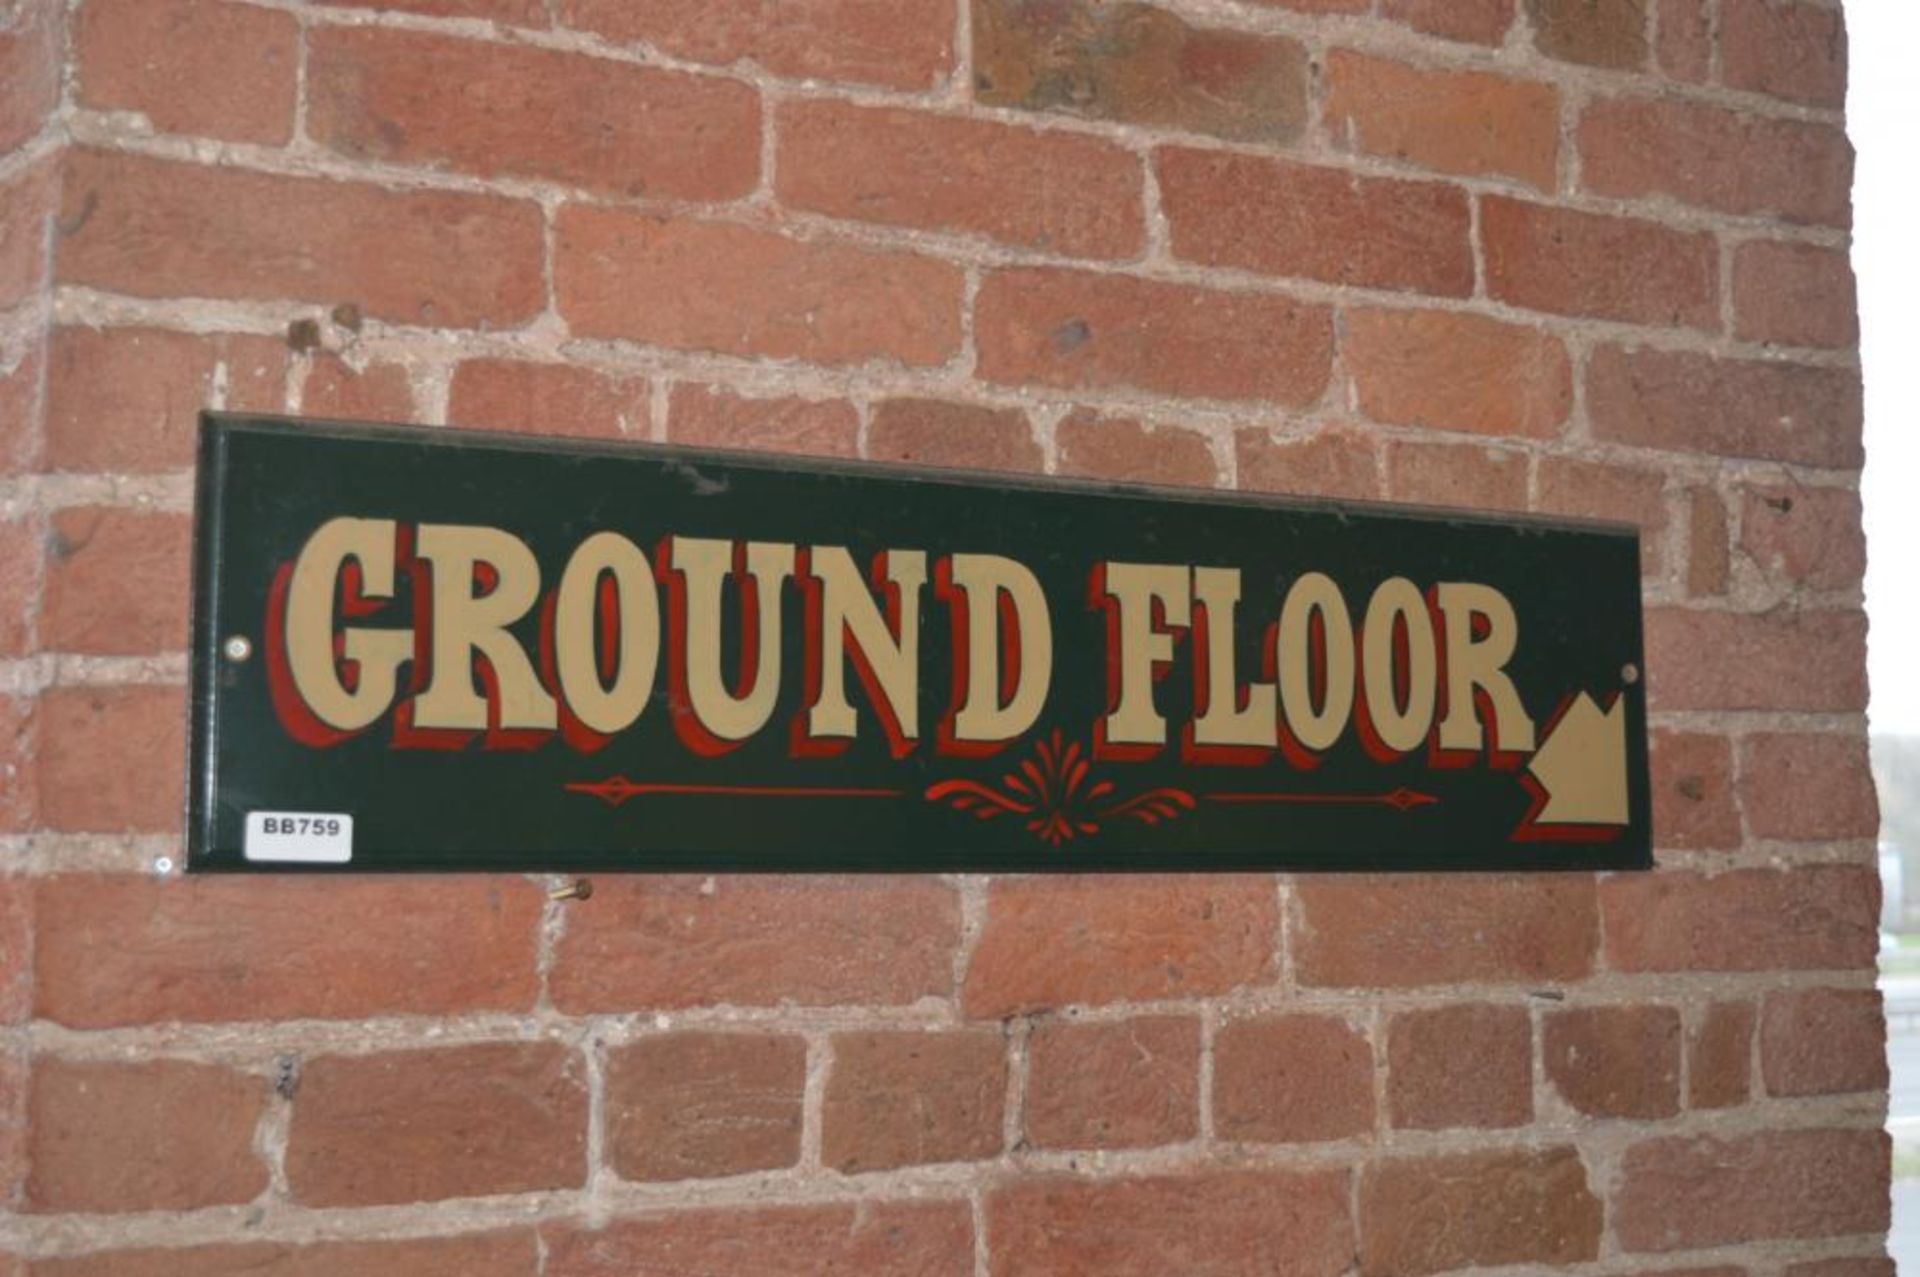 1 x Botany Bay Wooden Hand Painted Wall Signage - Ground Floor - Size 36 x 9 Inches - Ref BB759 - CL - Image 2 of 2